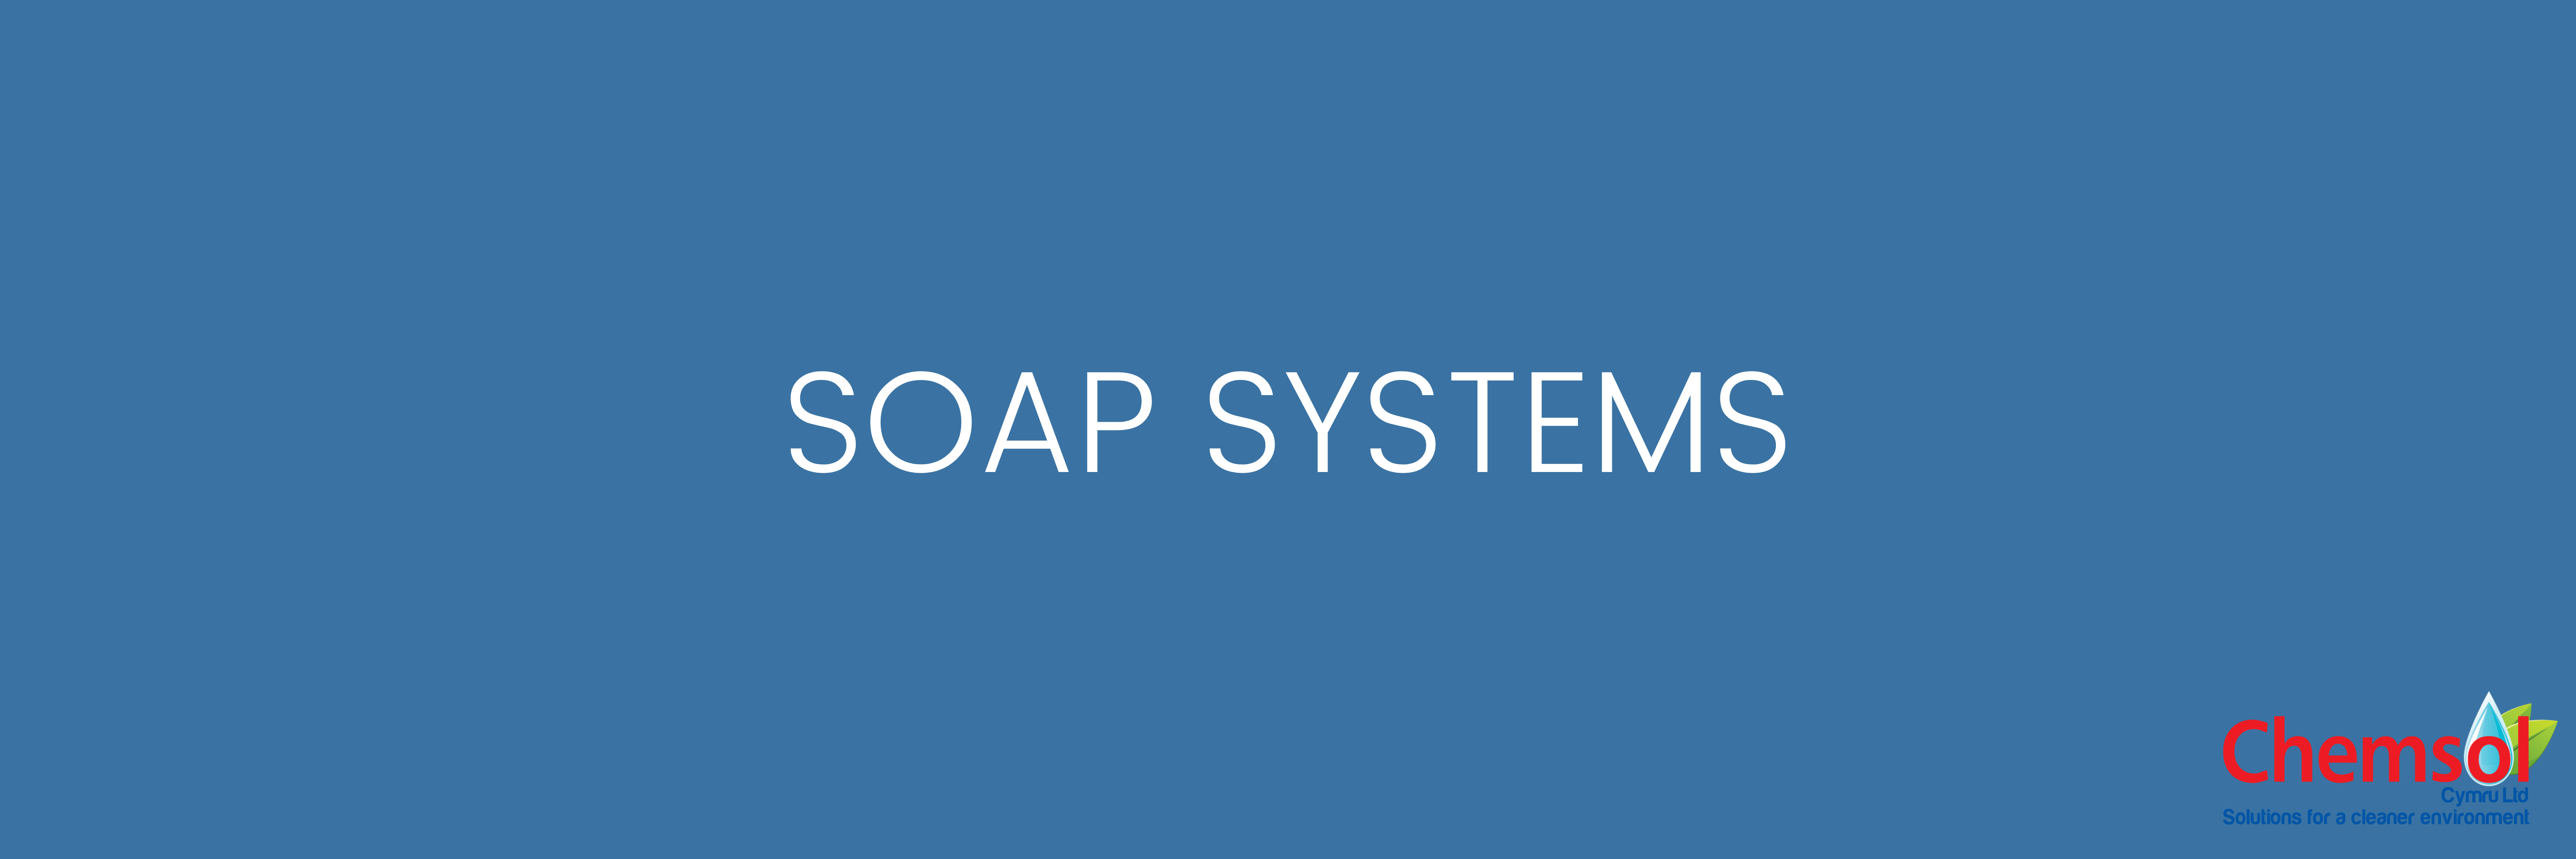 Soap Systems